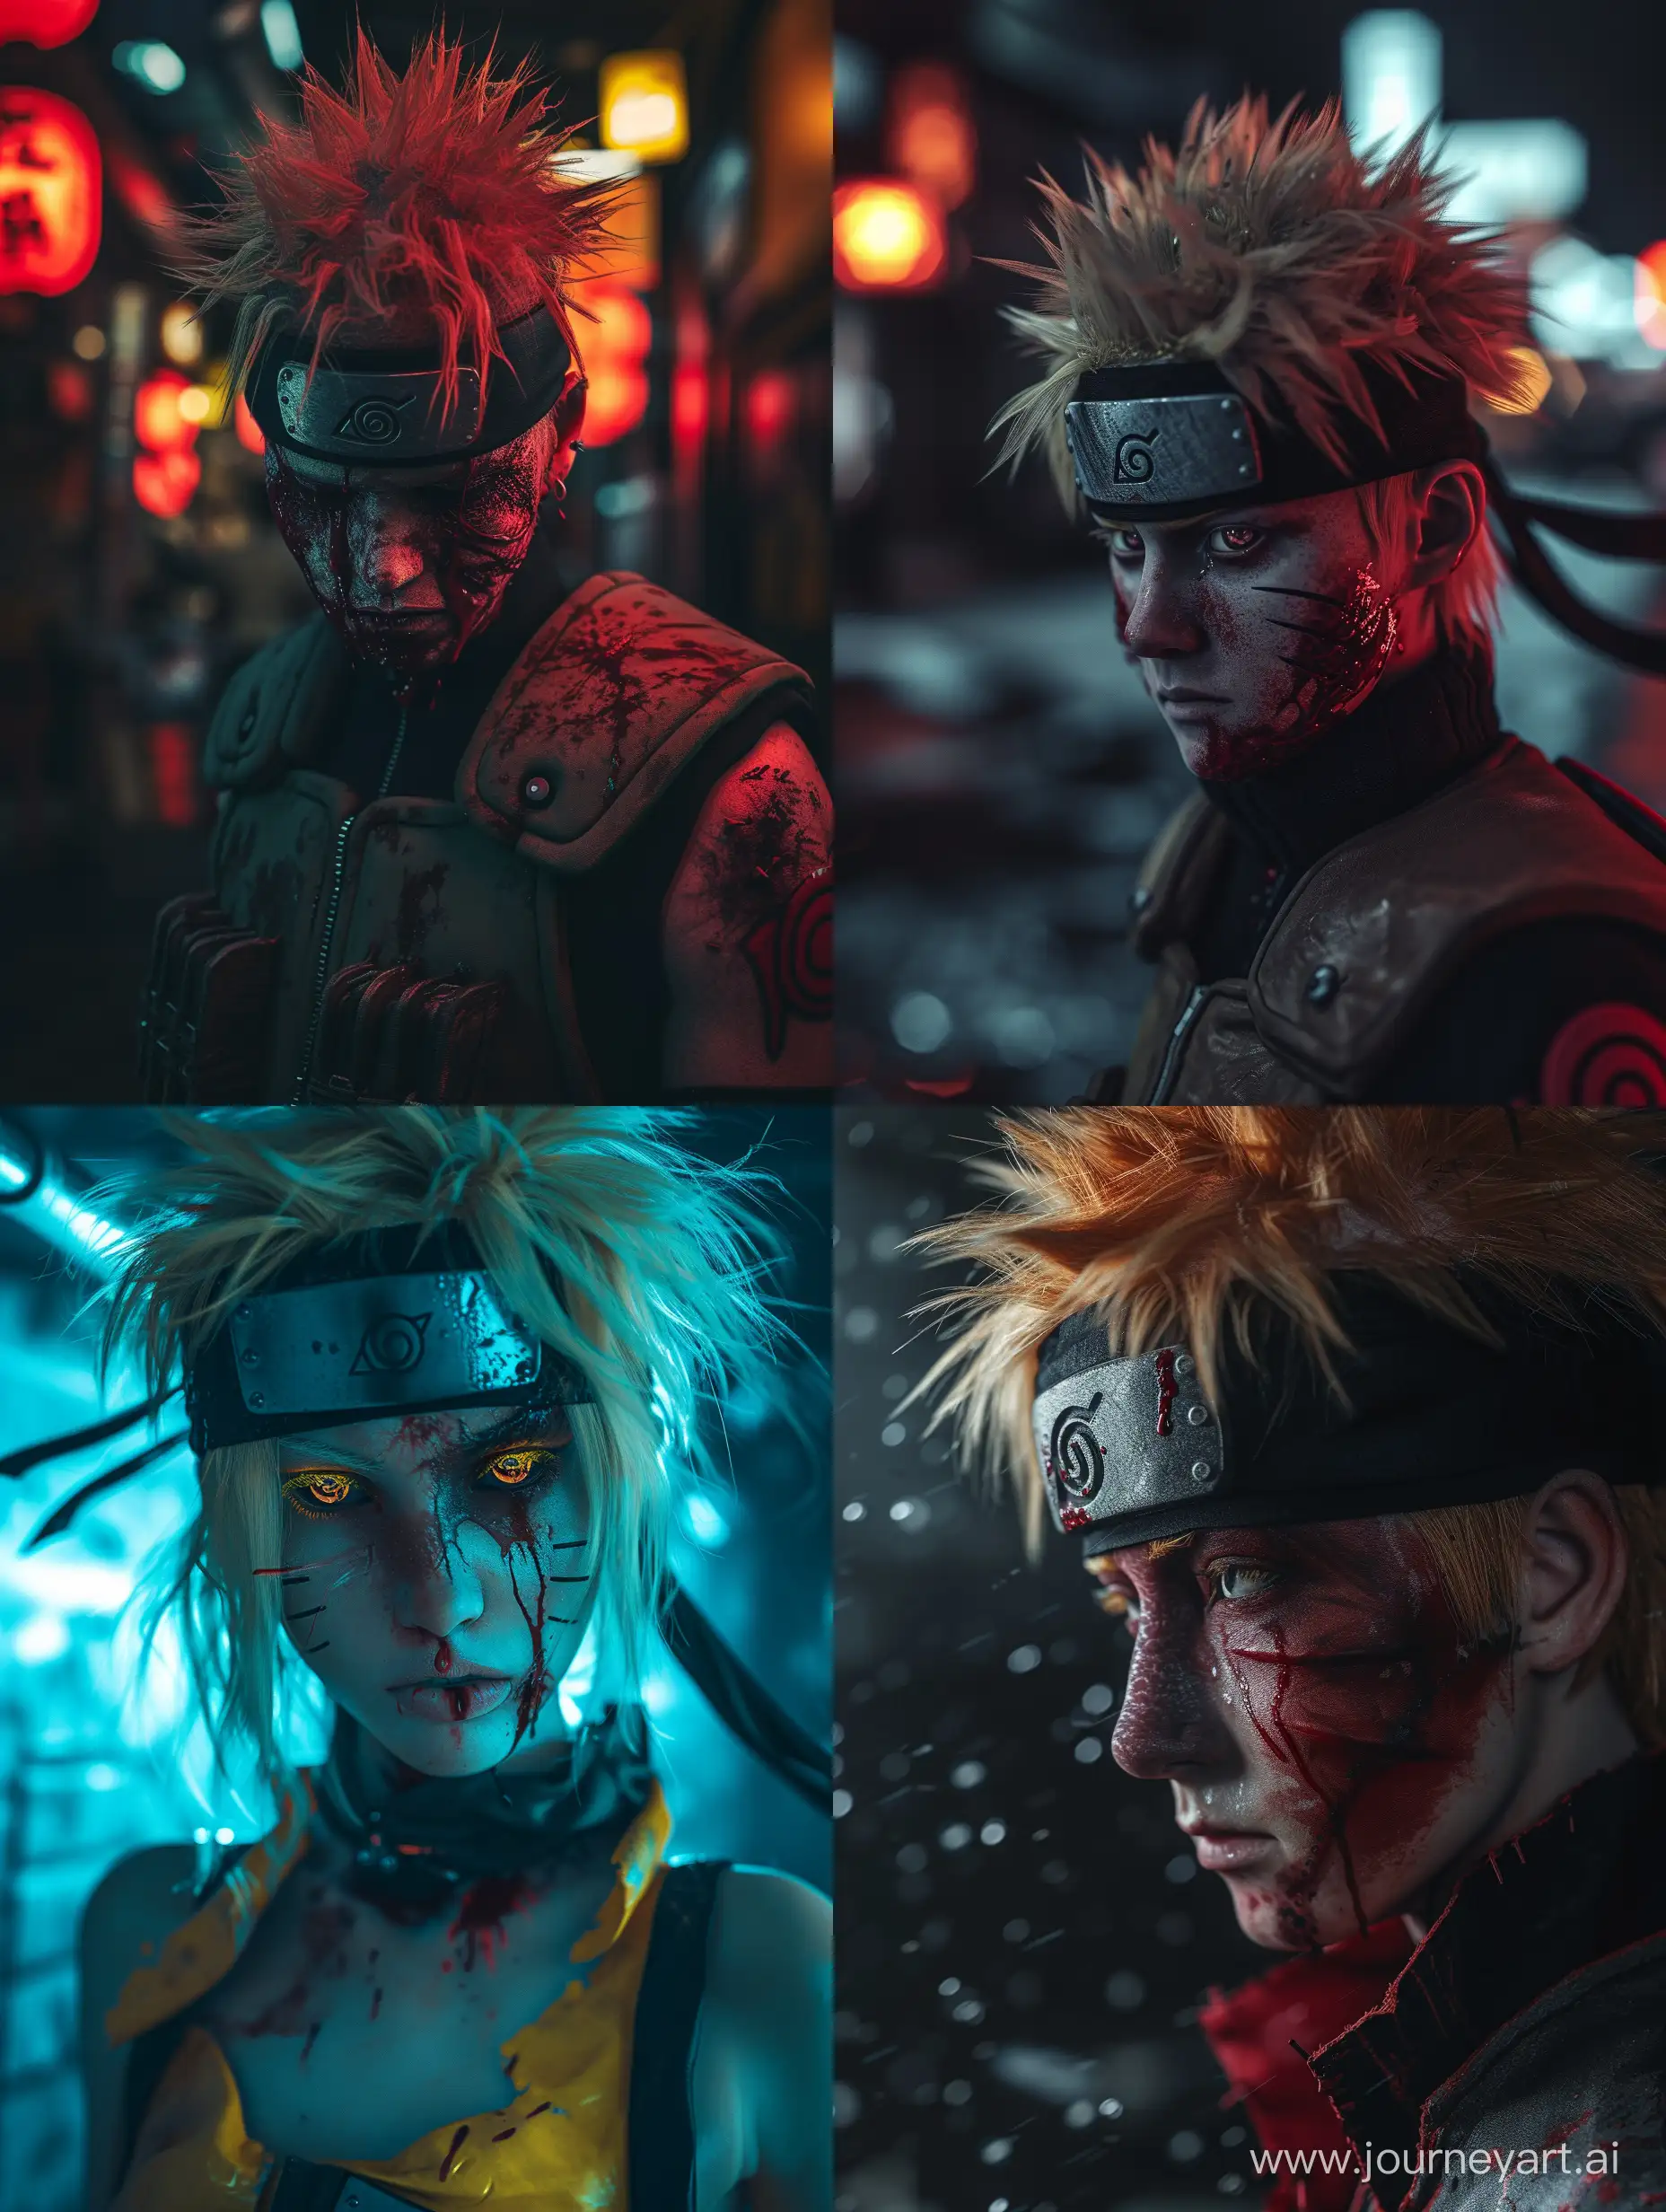 Urban-Cyberpunk-Style-Adult-Naruto-in-Realistic-AfterFight-Scene